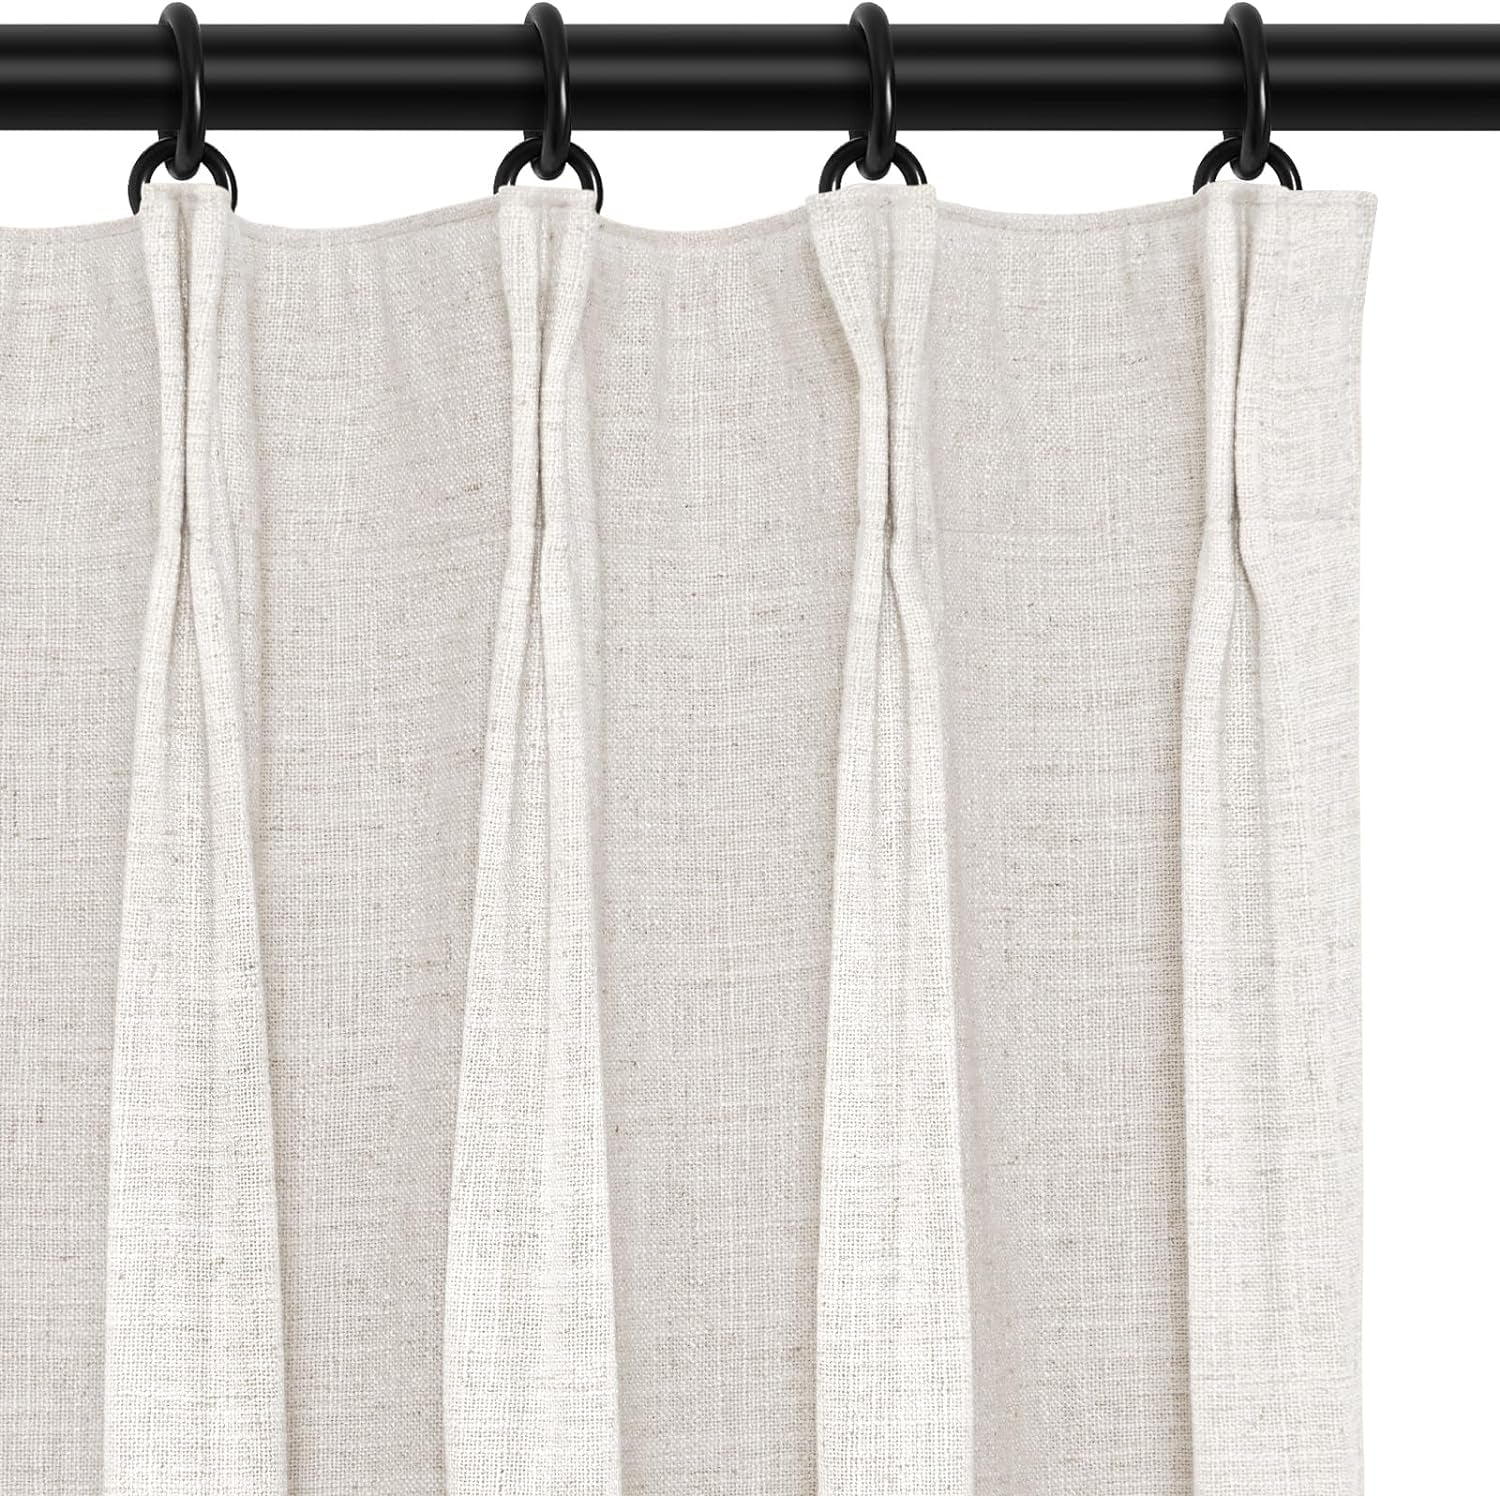 INOVADAY 100% Blackout Curtains for Bedroom, Pinch Pleated Linen Blackout Curtains 96 Inch Length 2 Panels Set, Thermal Room Darkening Linen Curtain Drapes for Living Room, W40 X L96,Beige White  INOVADAY Linen 40"W X 84"L-2 Panels 